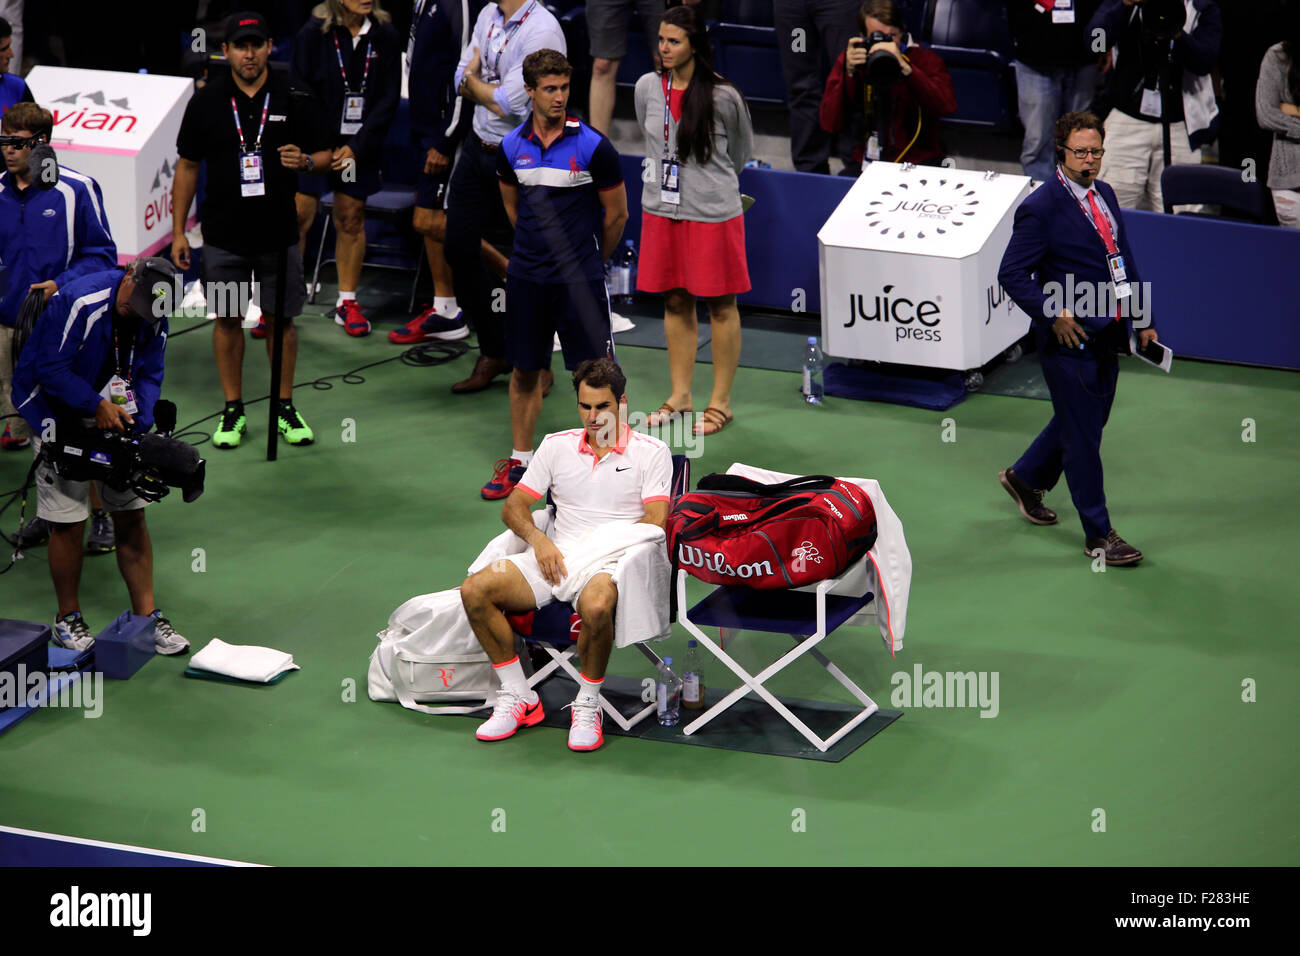 New York, USA. 13th Sep, 2015. ROger Federer sits in his chair after losing the U.S. Open Final to Novak Djokovic who won the match 6-4, 5-7, 6-4, 6-4for his second U.S Open title at Flushing Meadows, New York on September 13th, 2015. Credit:  Adam Stoltman/Alamy Live News Stock Photo